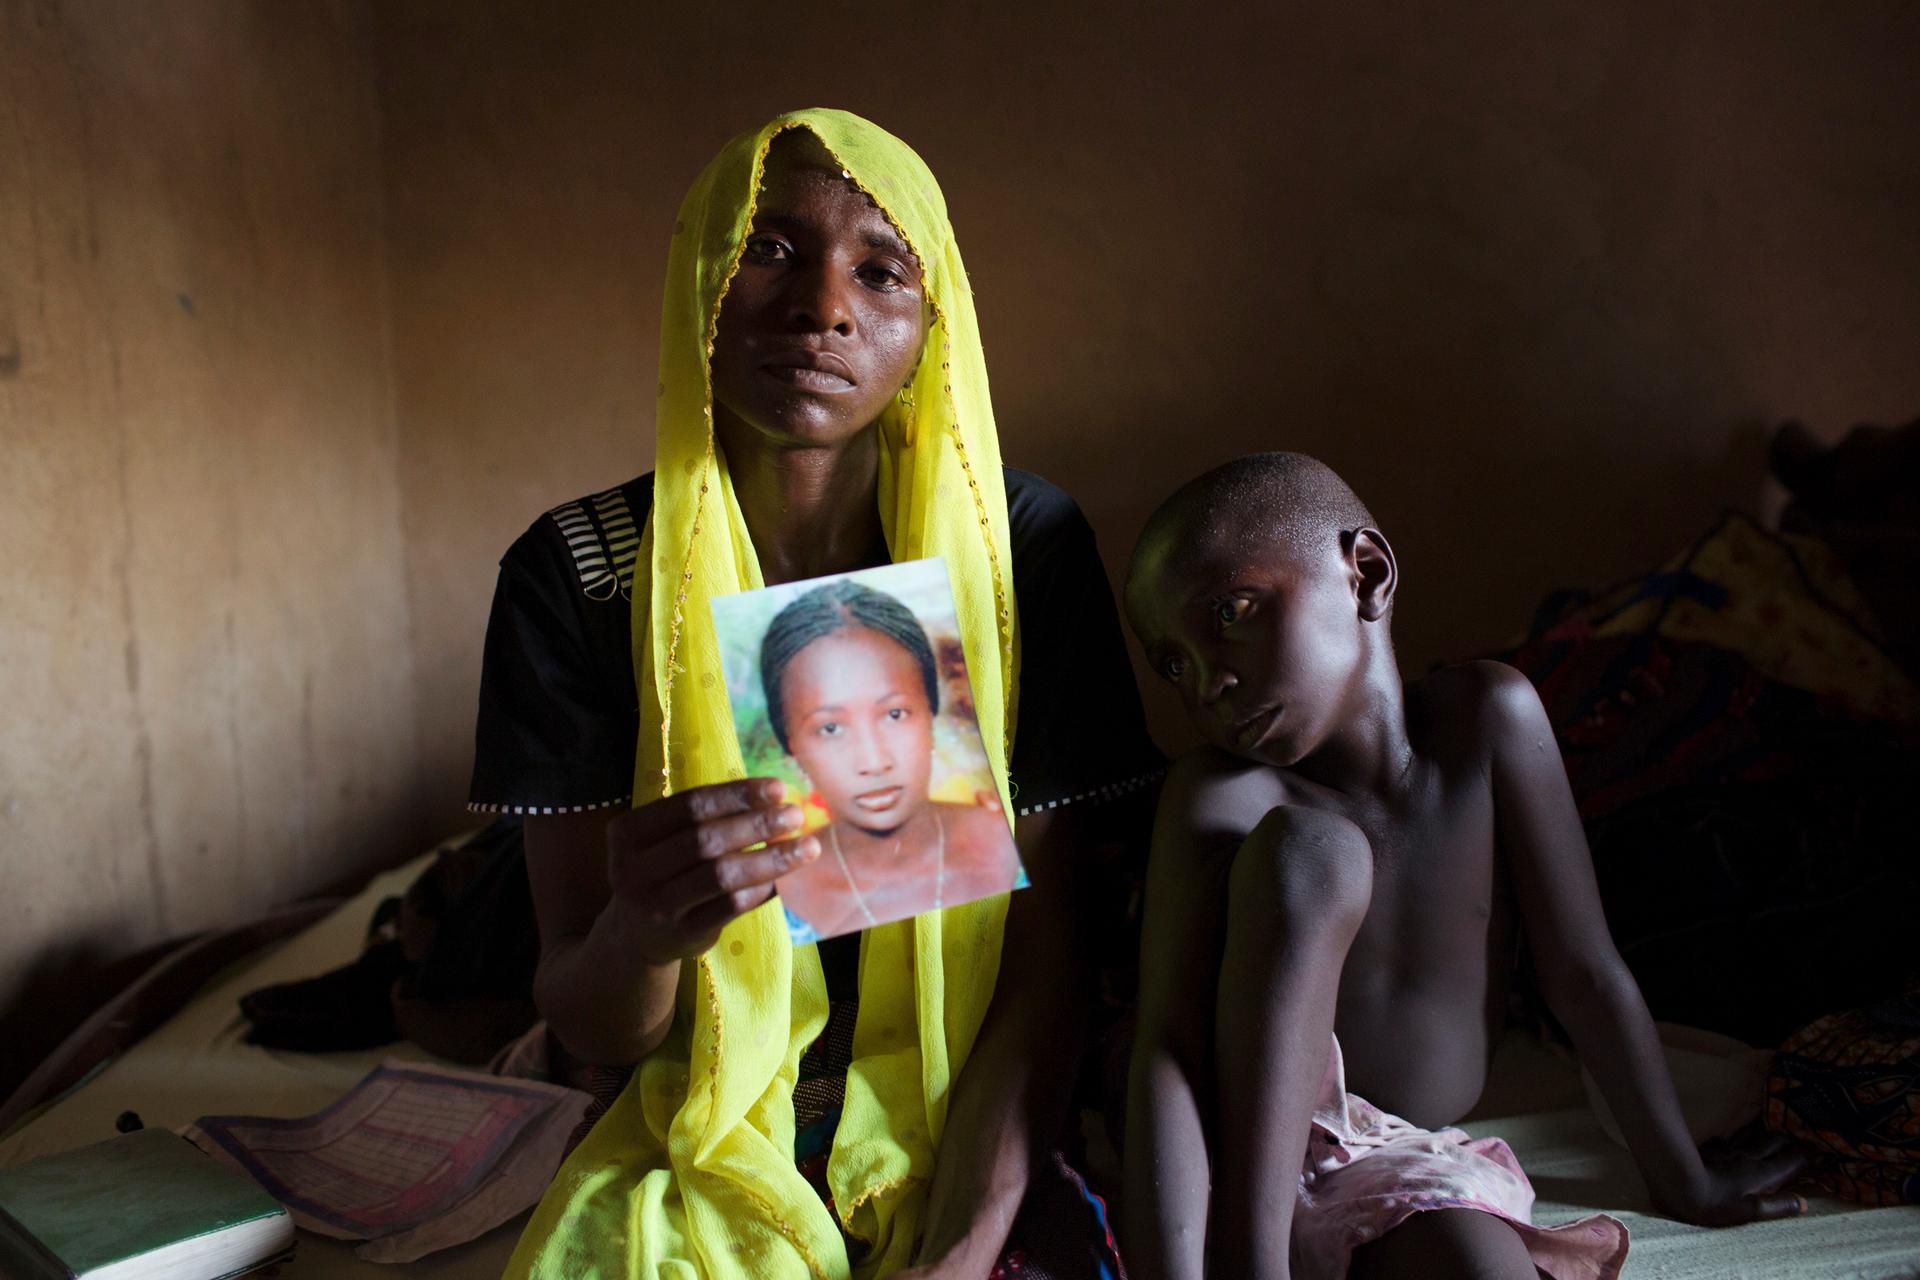 Rachel Daniel, 35, holds up a picture of her abducted daughter Rose Daniel, 17, as her son Bukar, 7, sits beside her at her home in Maiduguri in northeast Nigeria on May 21, 2014. Rose is one of the more than 200 of her classmates on April 14 by Boko Hara